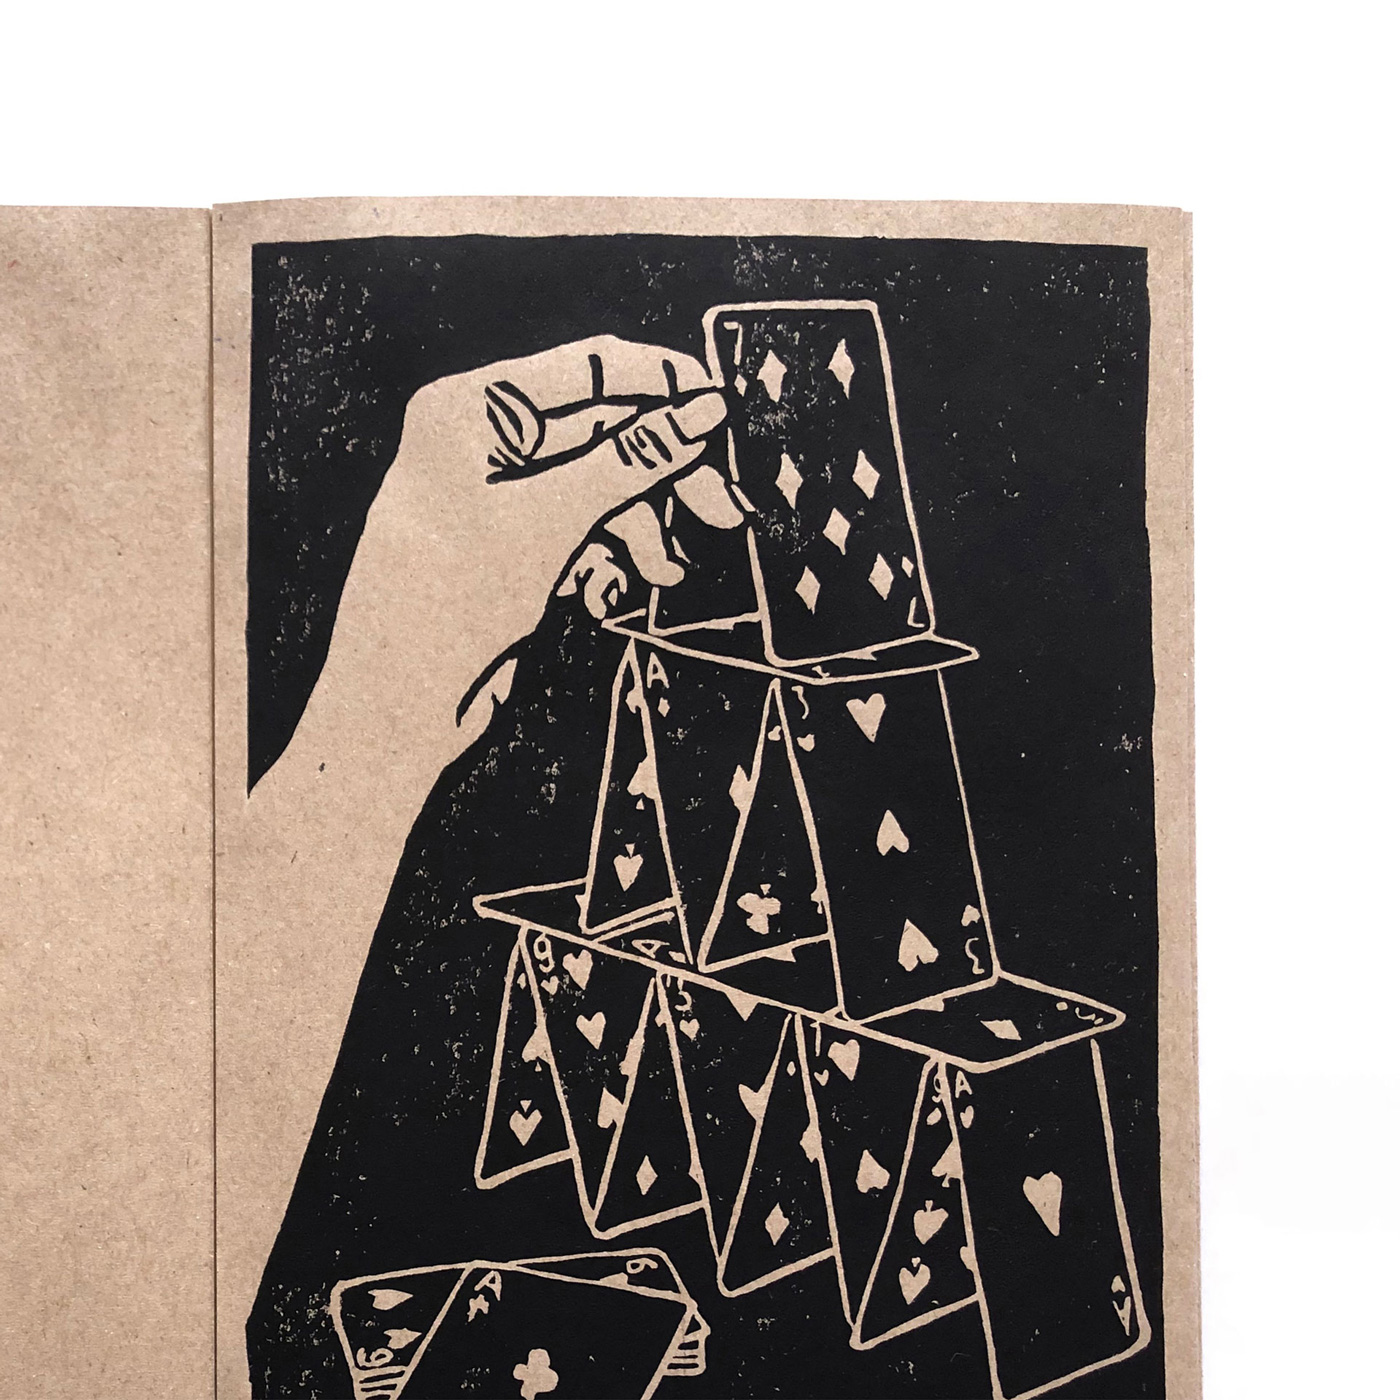 detail of a linocut printed illustration with a hand building a card house